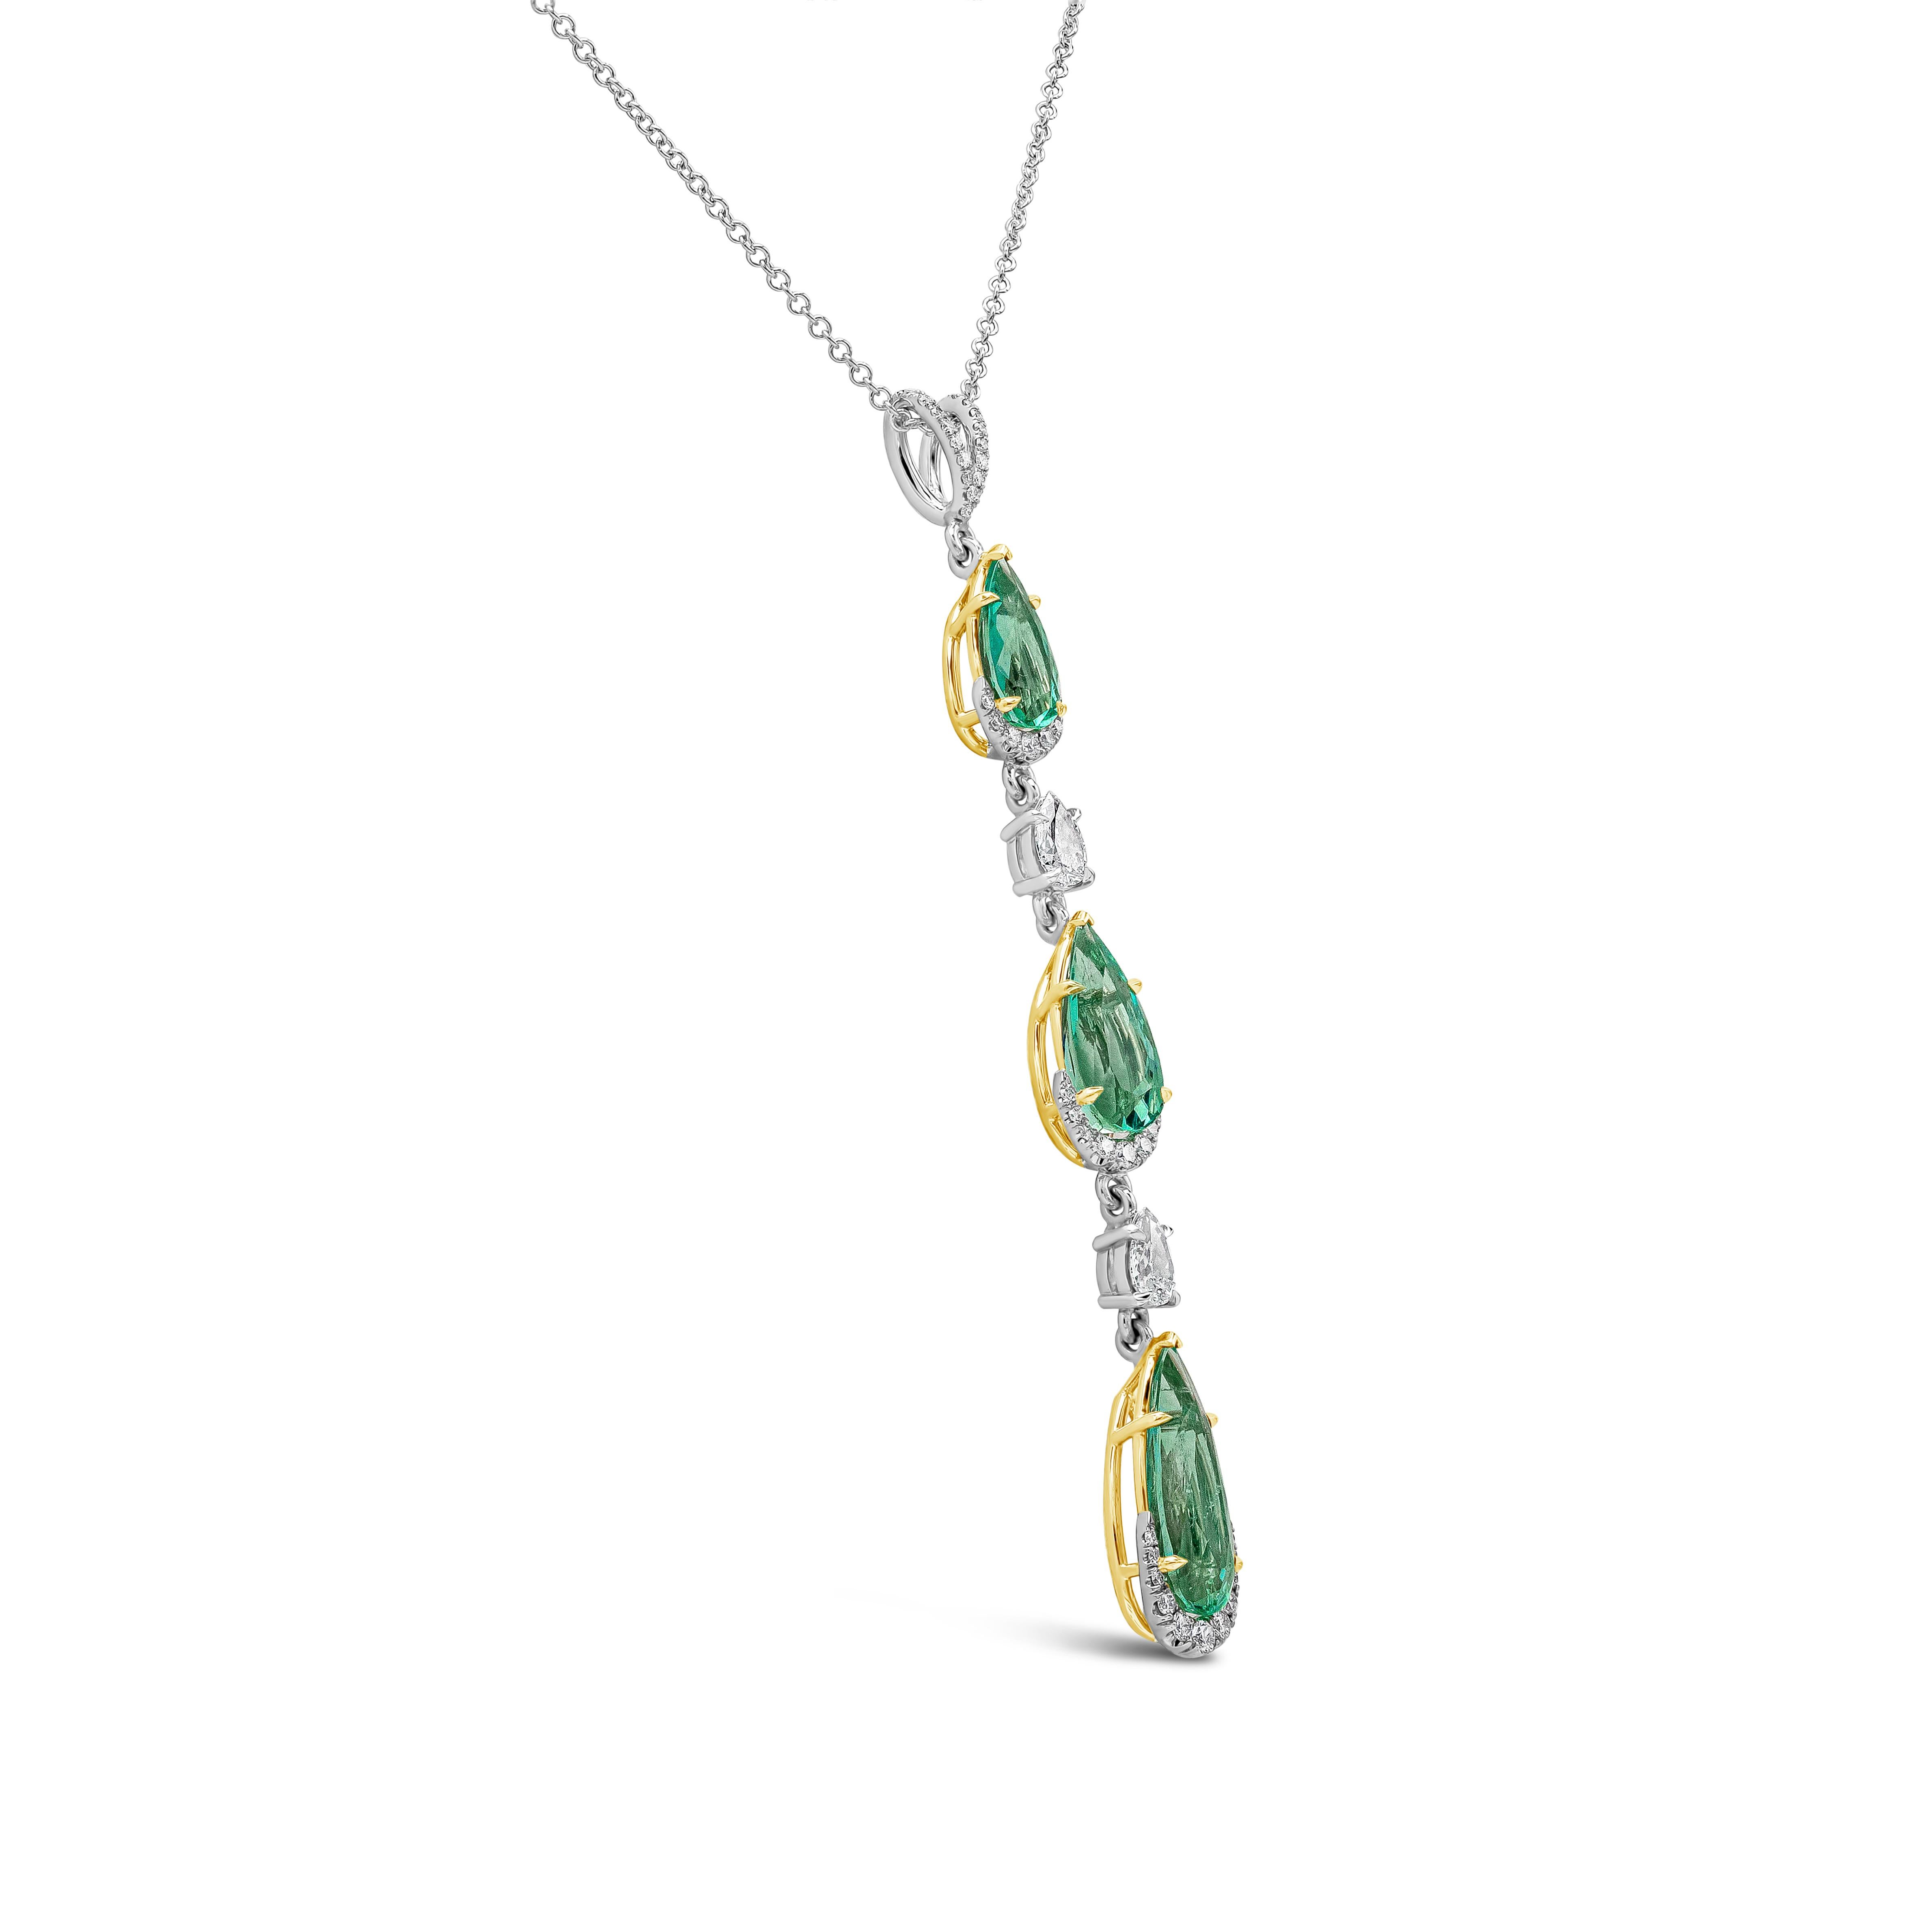 A fashionable pendant necklace showcasing three graduating pear shape emeralds, spaced by brilliant pear shape diamonds. Emeralds are Colombian origin and weighs 5.50 carats total. Diamonds weigh 0.81 carats total. Made in 18k yellow gold and